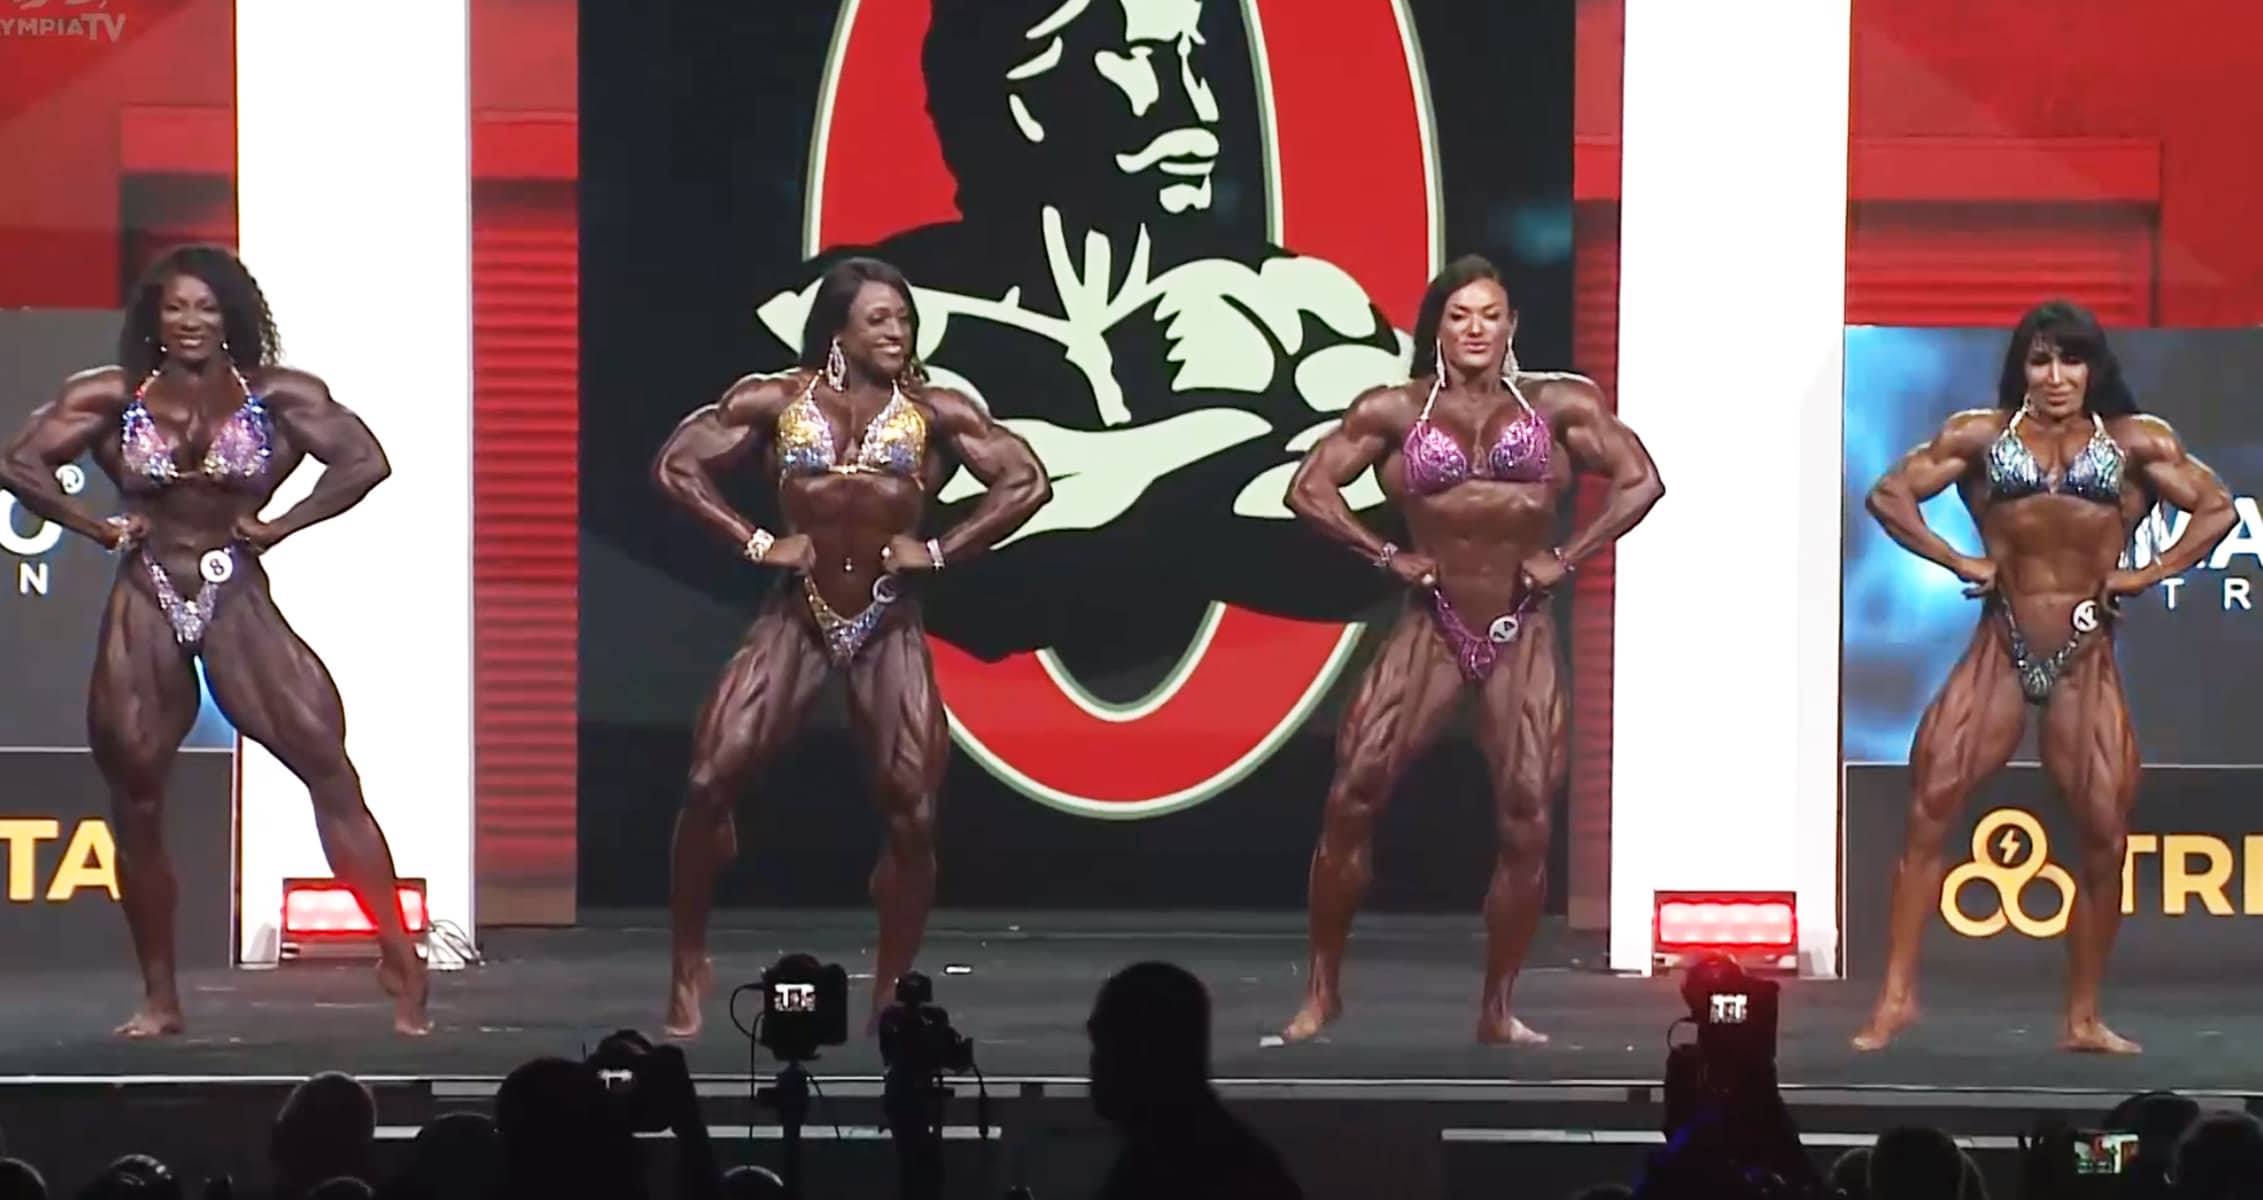 Ms. Olympia Finals